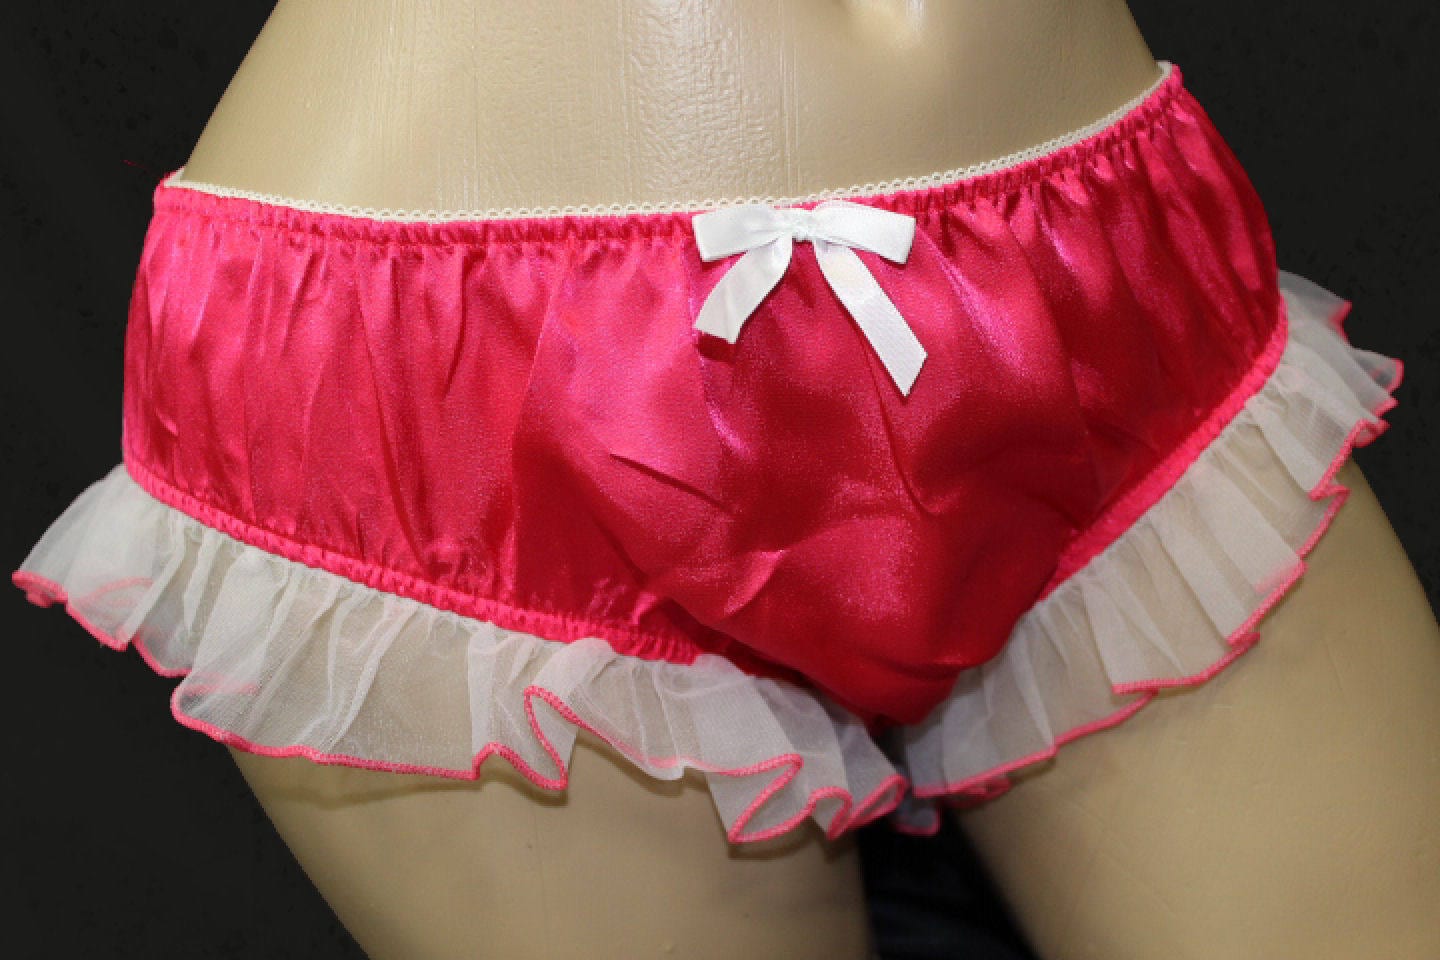 Vintage French red/fuschia bustier panties set, Ravage, size 36C